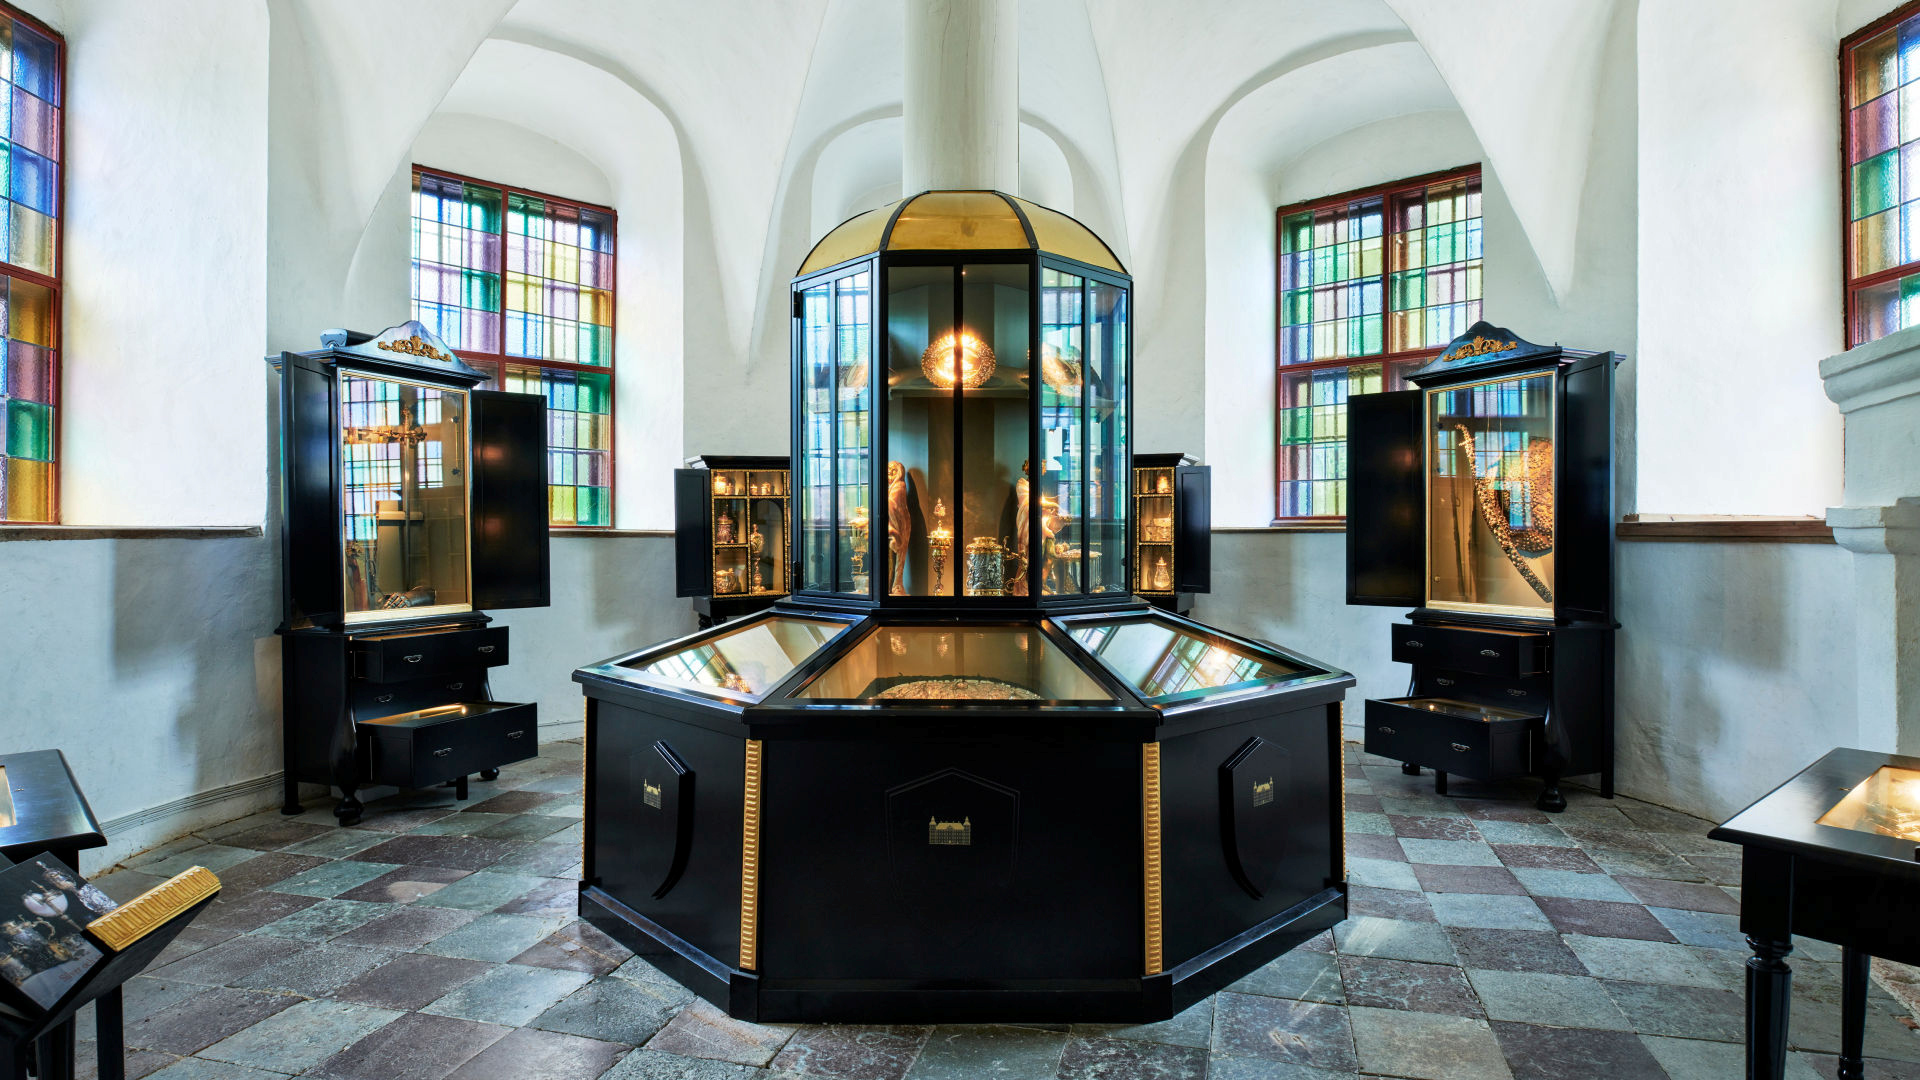 An octagonal room with showcases in black and gold.